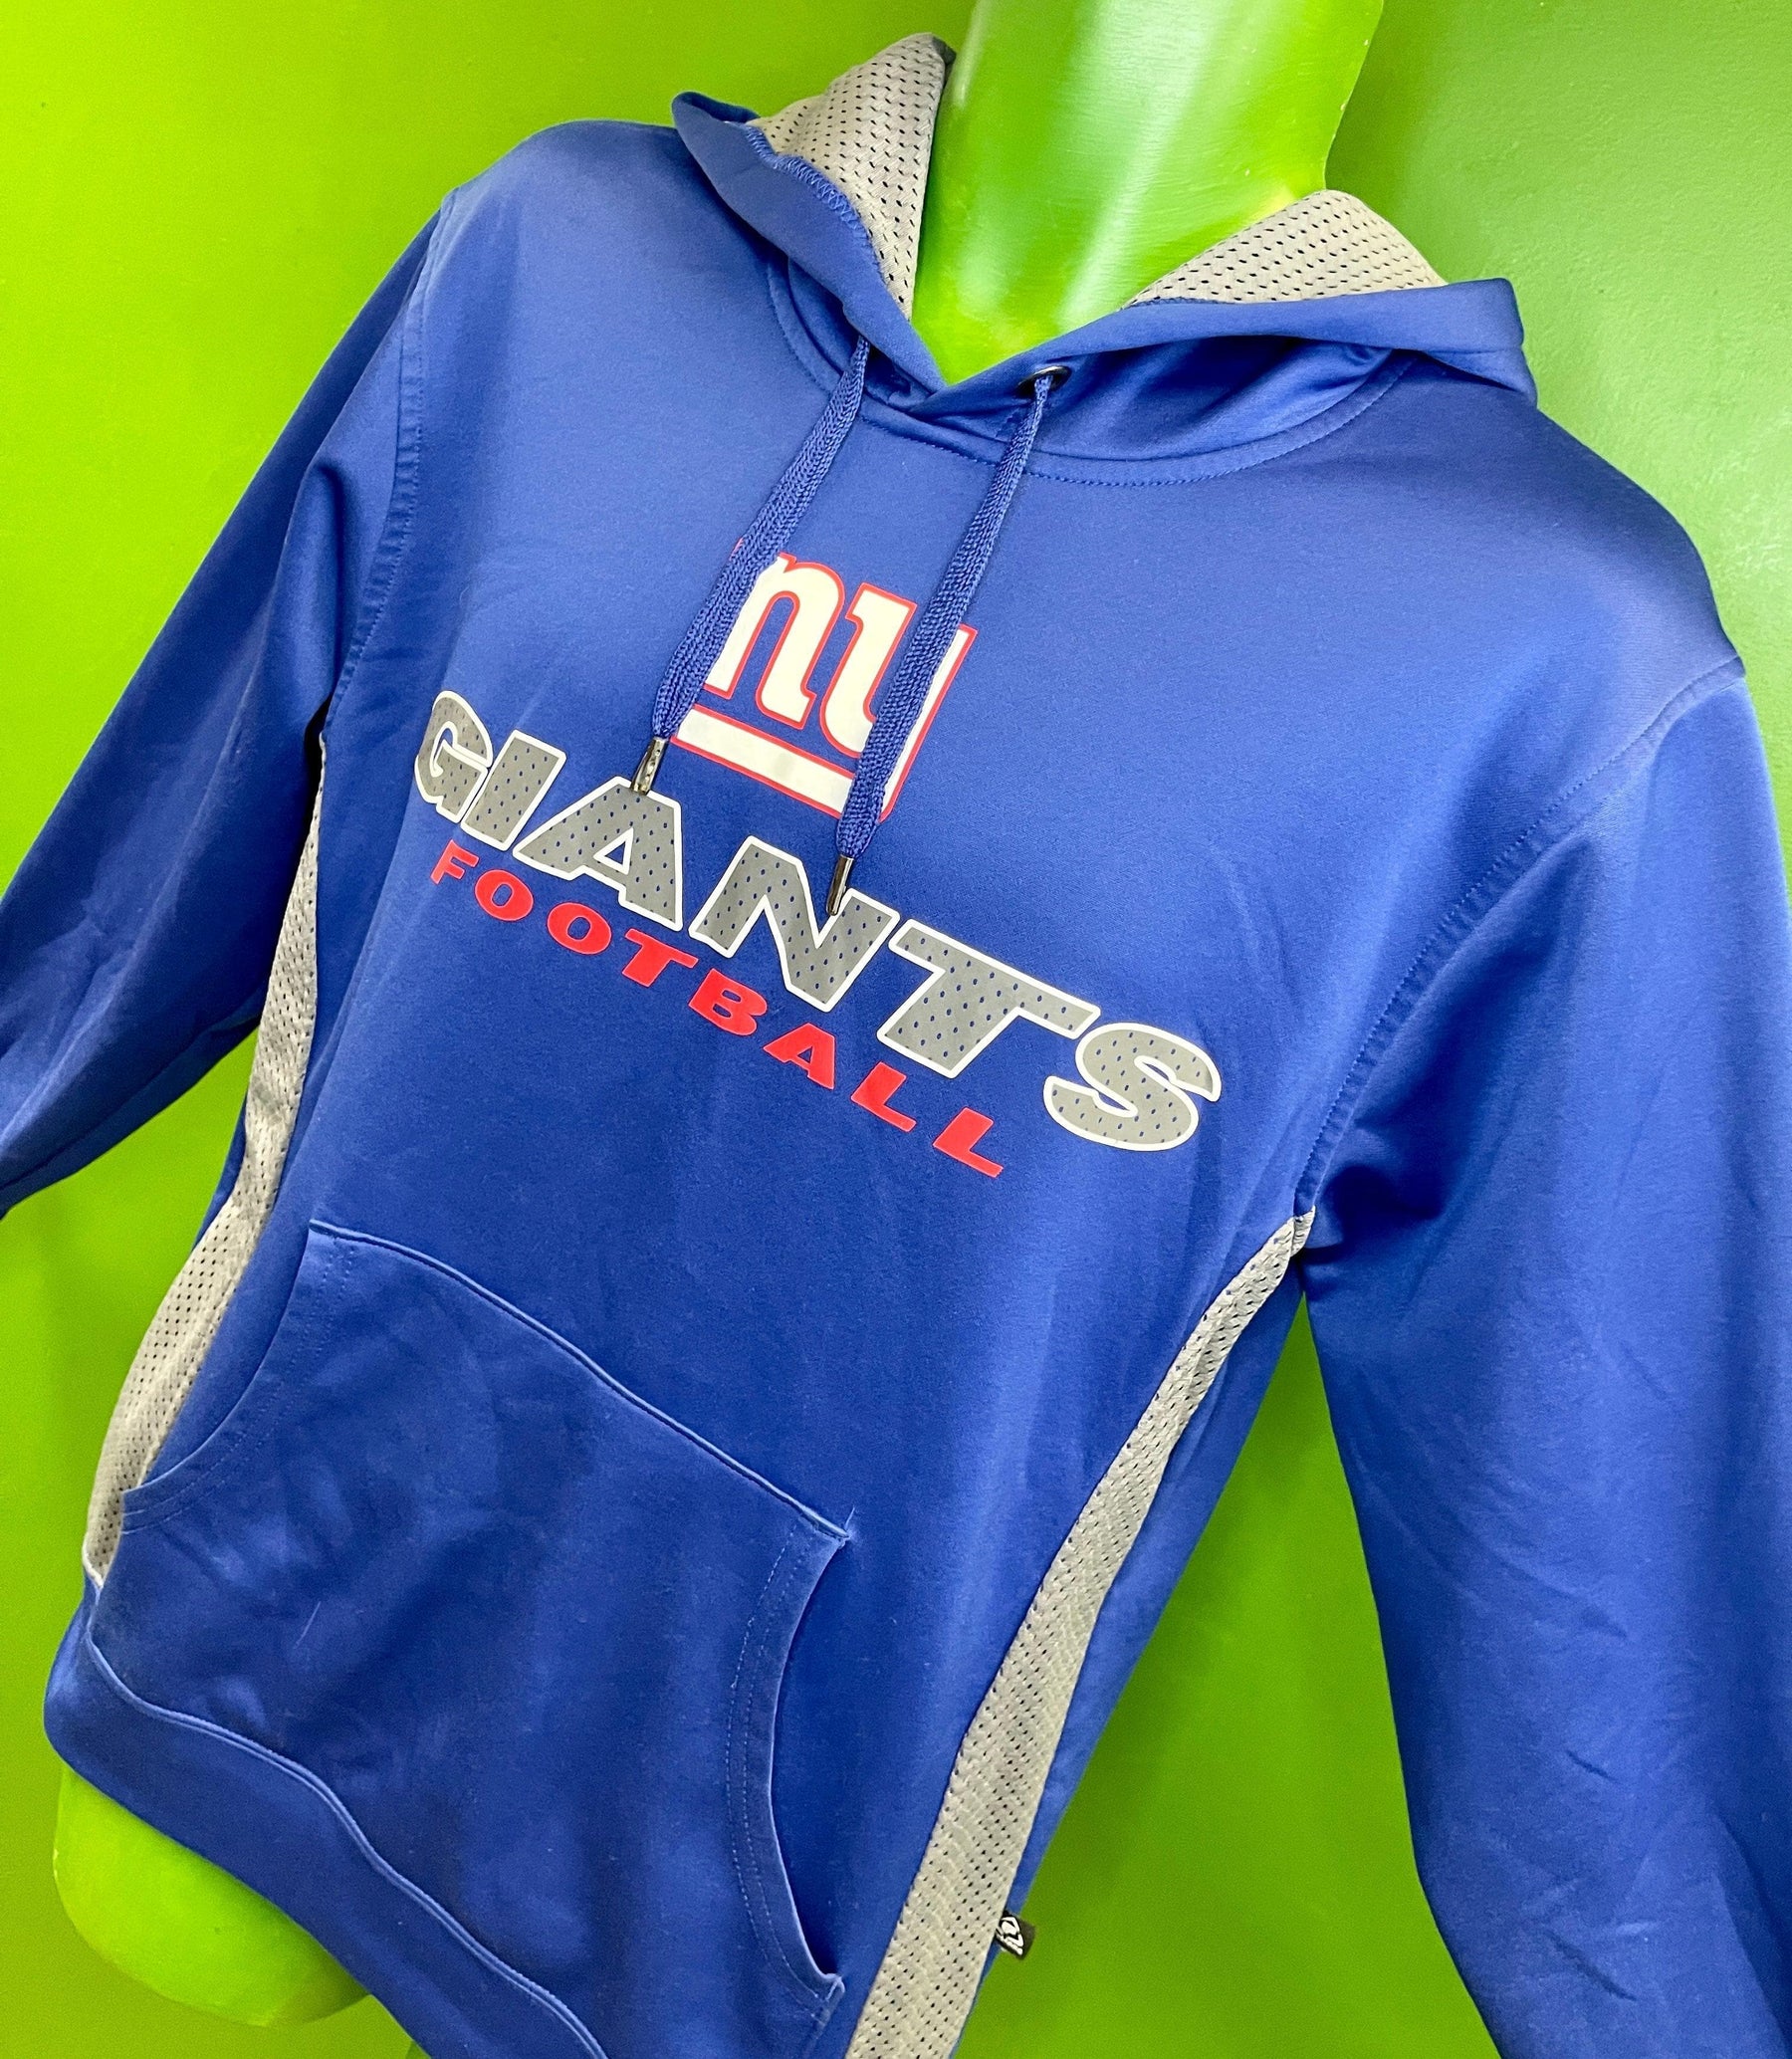 NFL New York Giants Blue Pullover Hoodie Men's Small